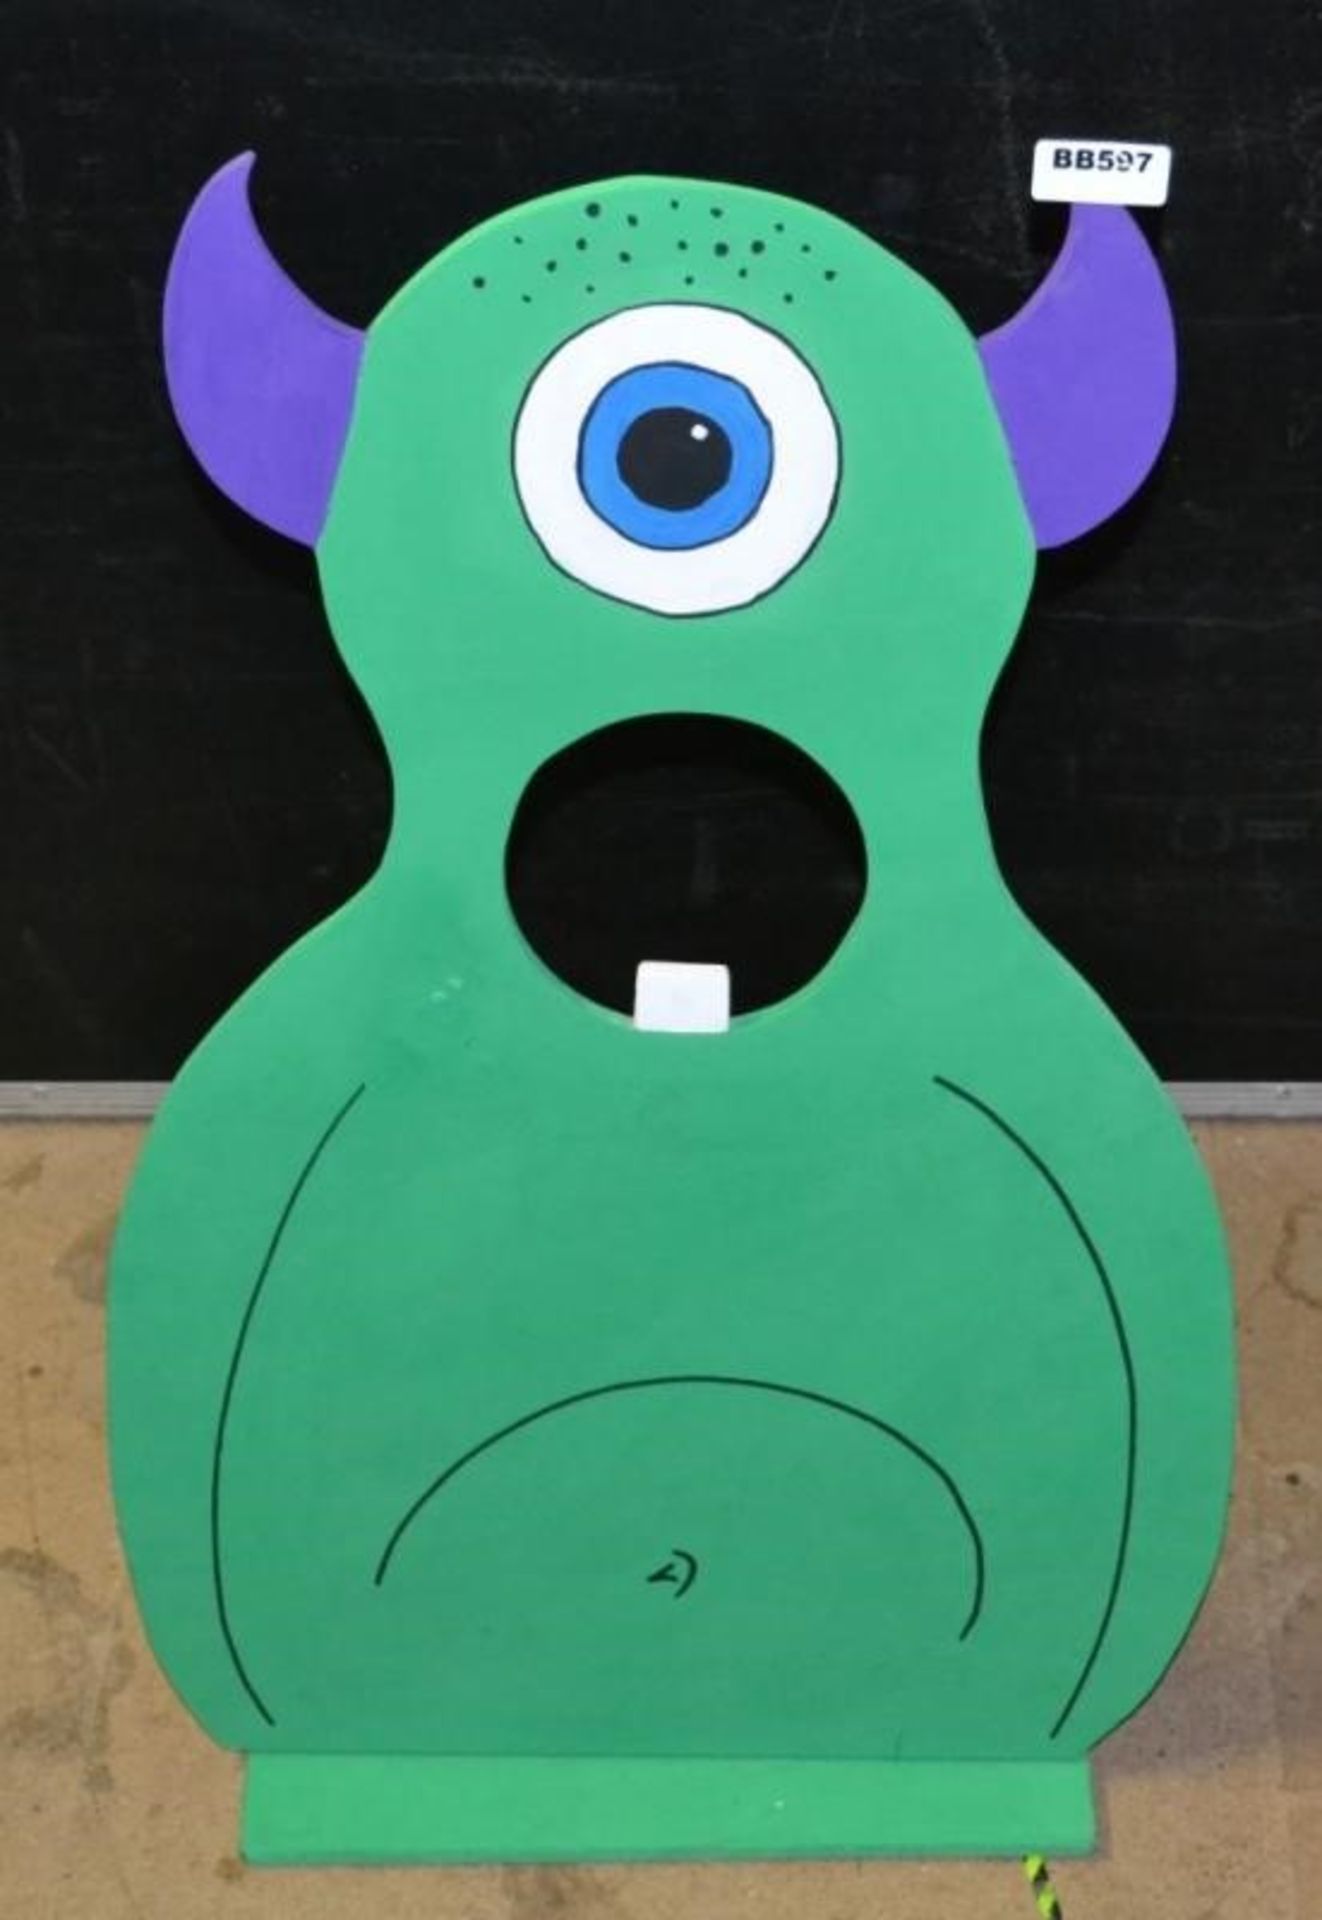 1 x Monster Selfie Floor Standing Board - Small Size Suitable For Toddlers - Ref BB597 PTP - CL351 -